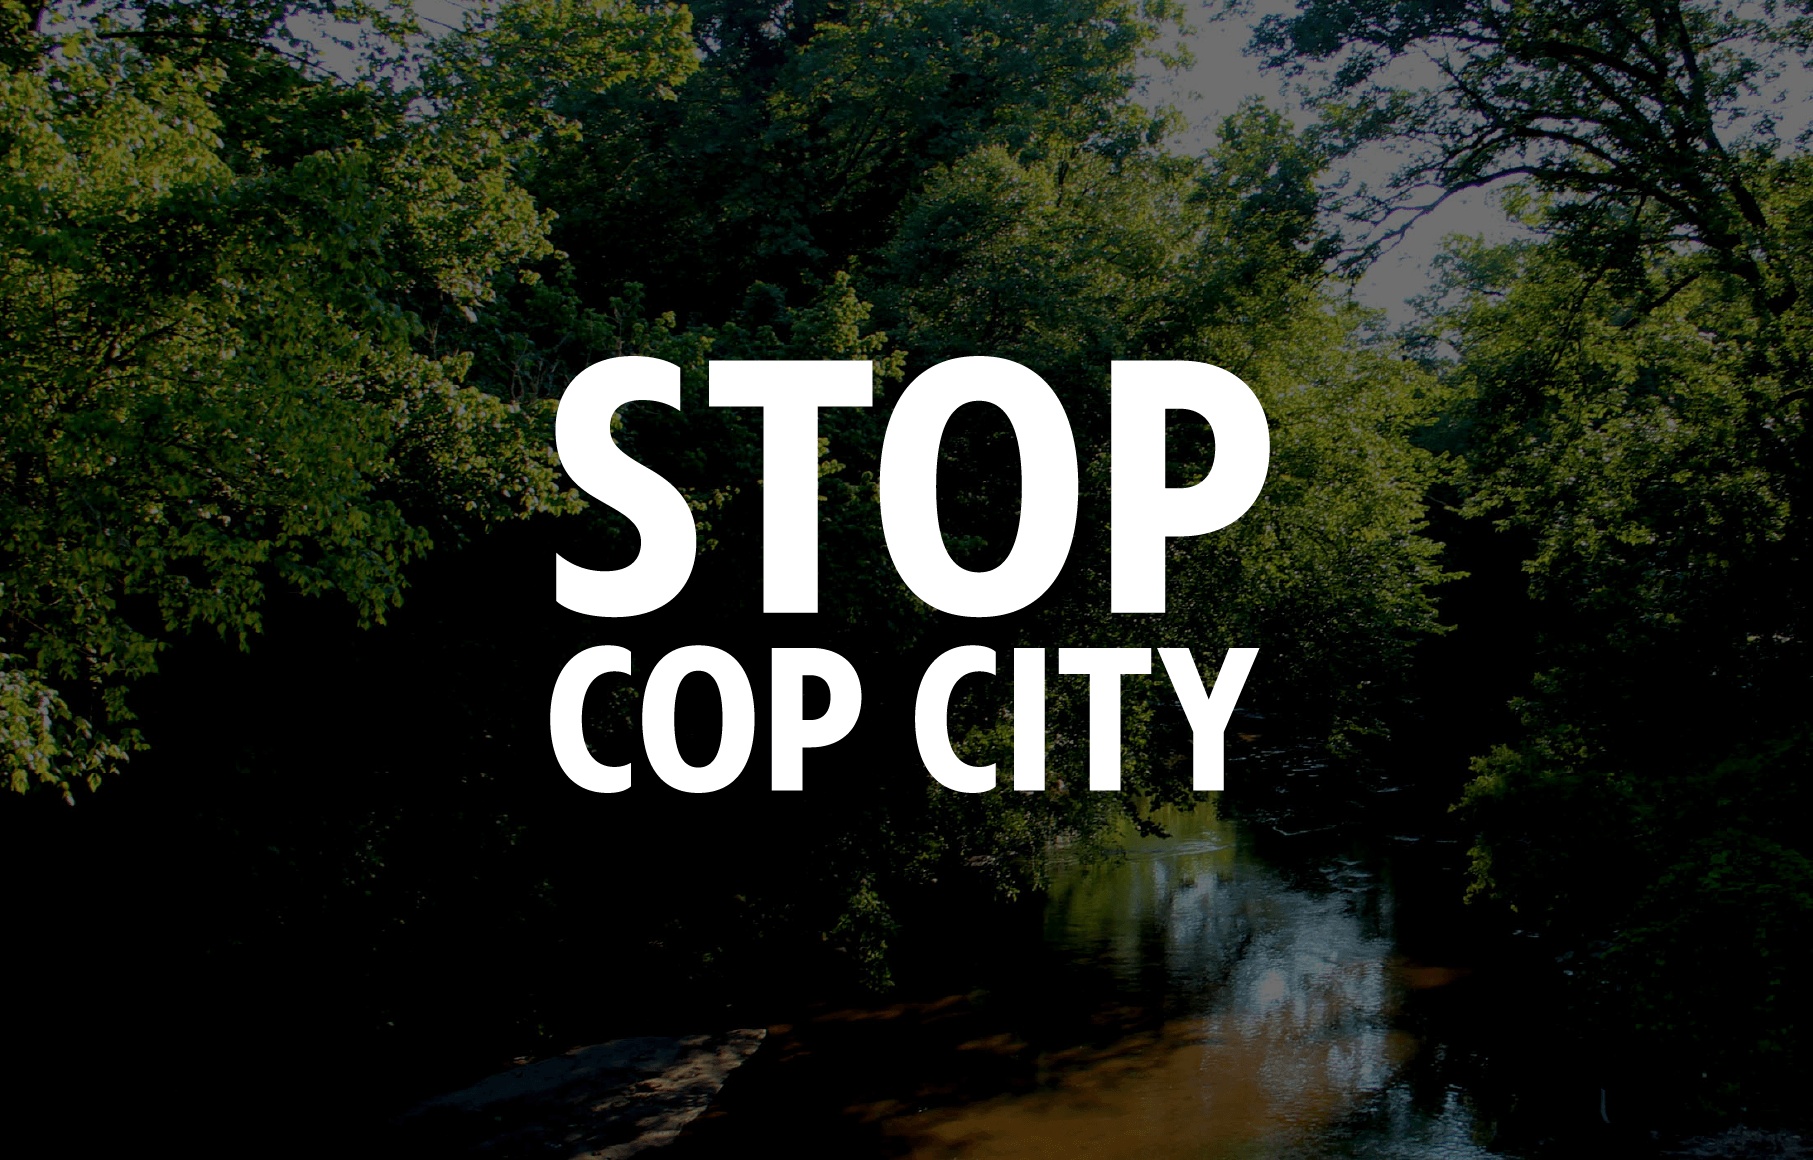 5 things you need to know about Cop City